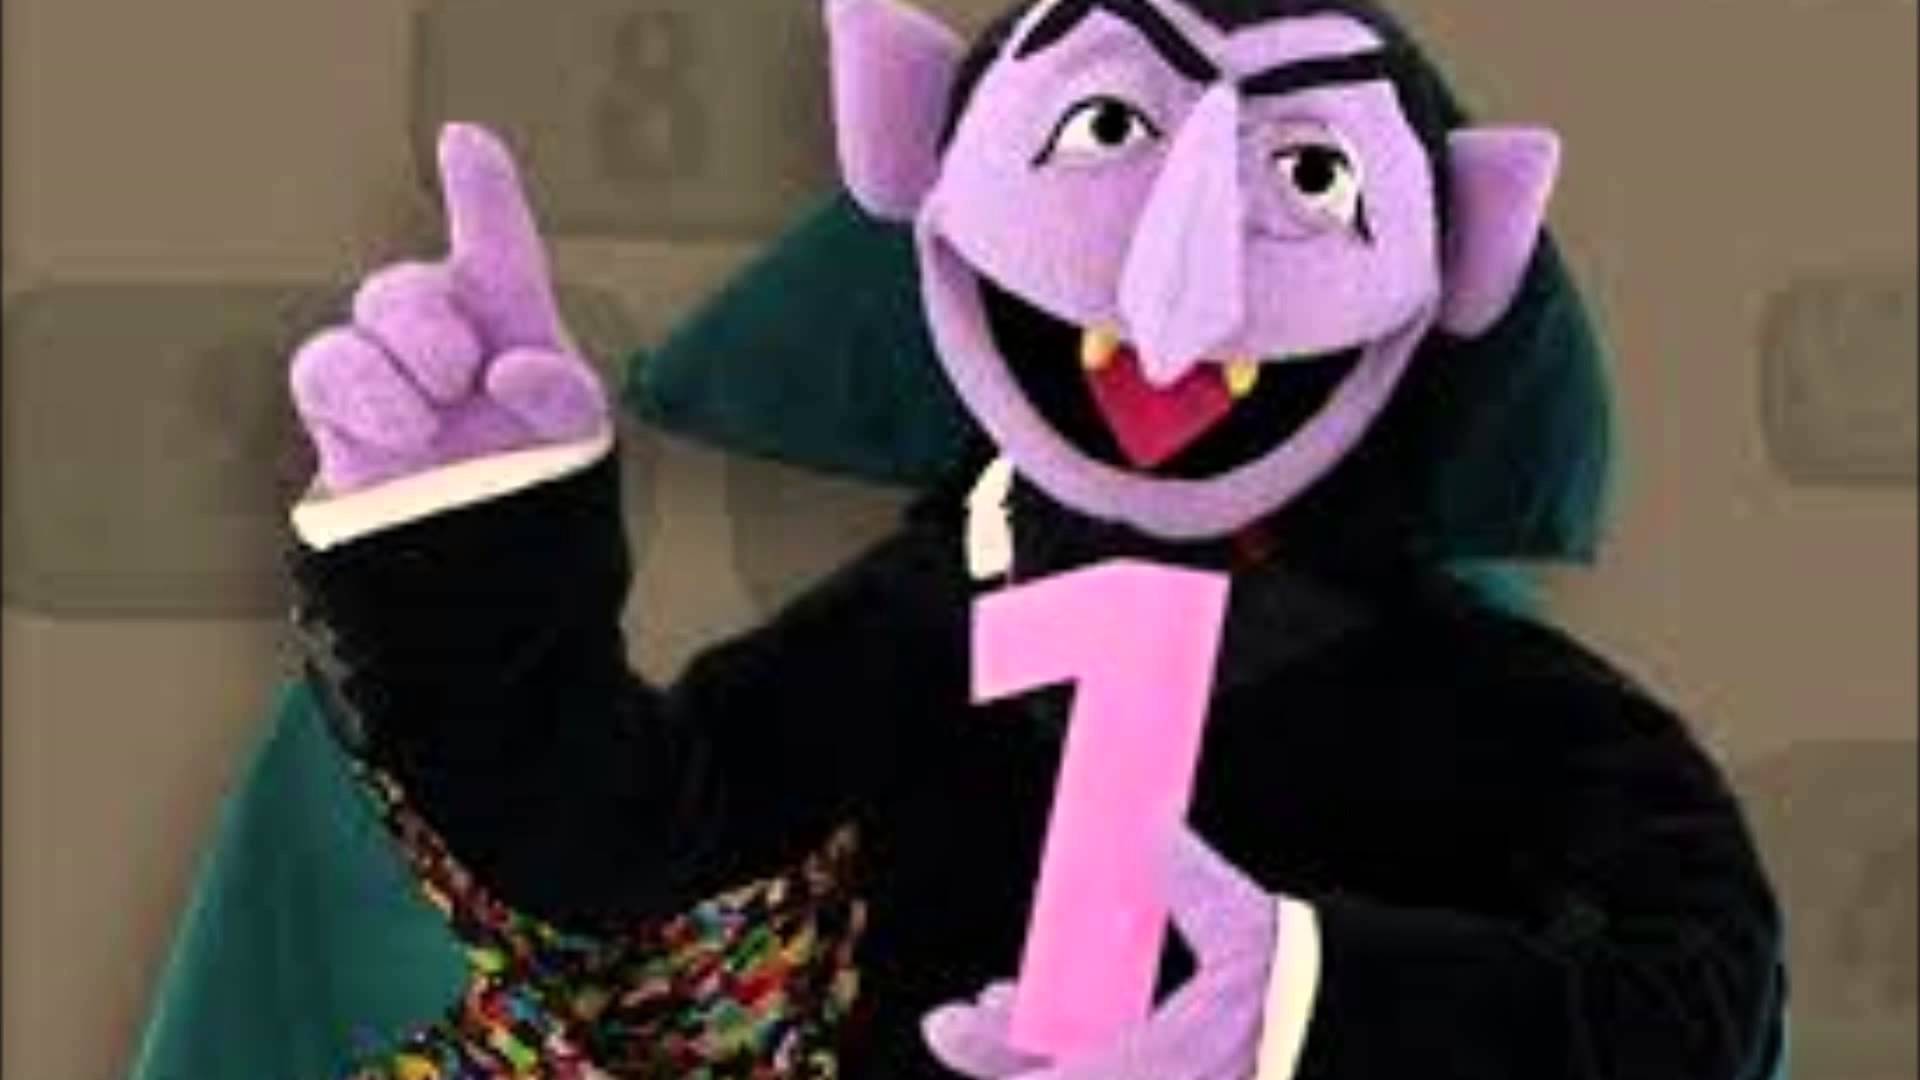 the count 1 Blank Meme Template